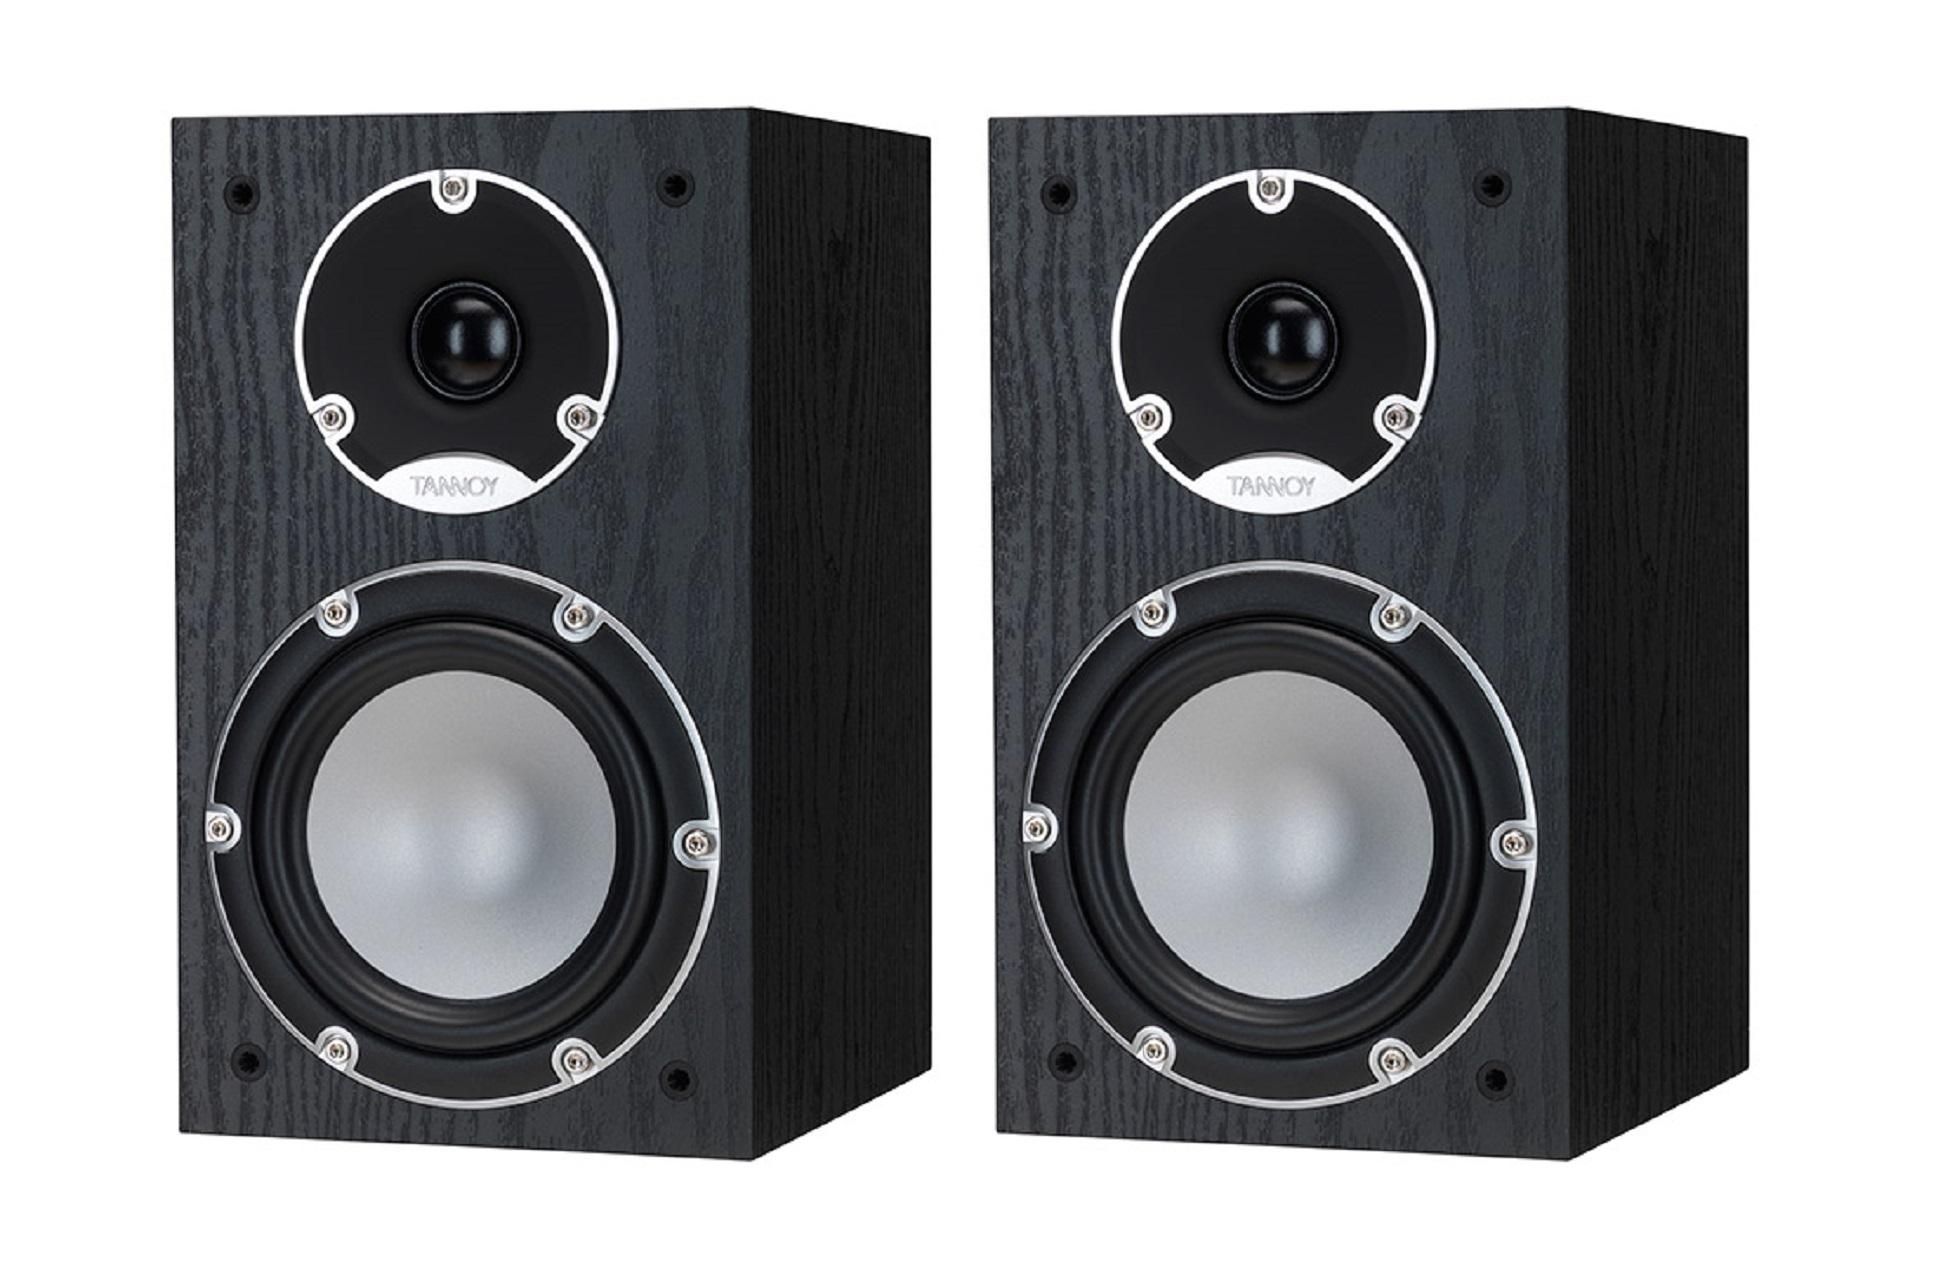 Product Review Tannoy Mercury 7 1 Speakers Richer Sounds Blog